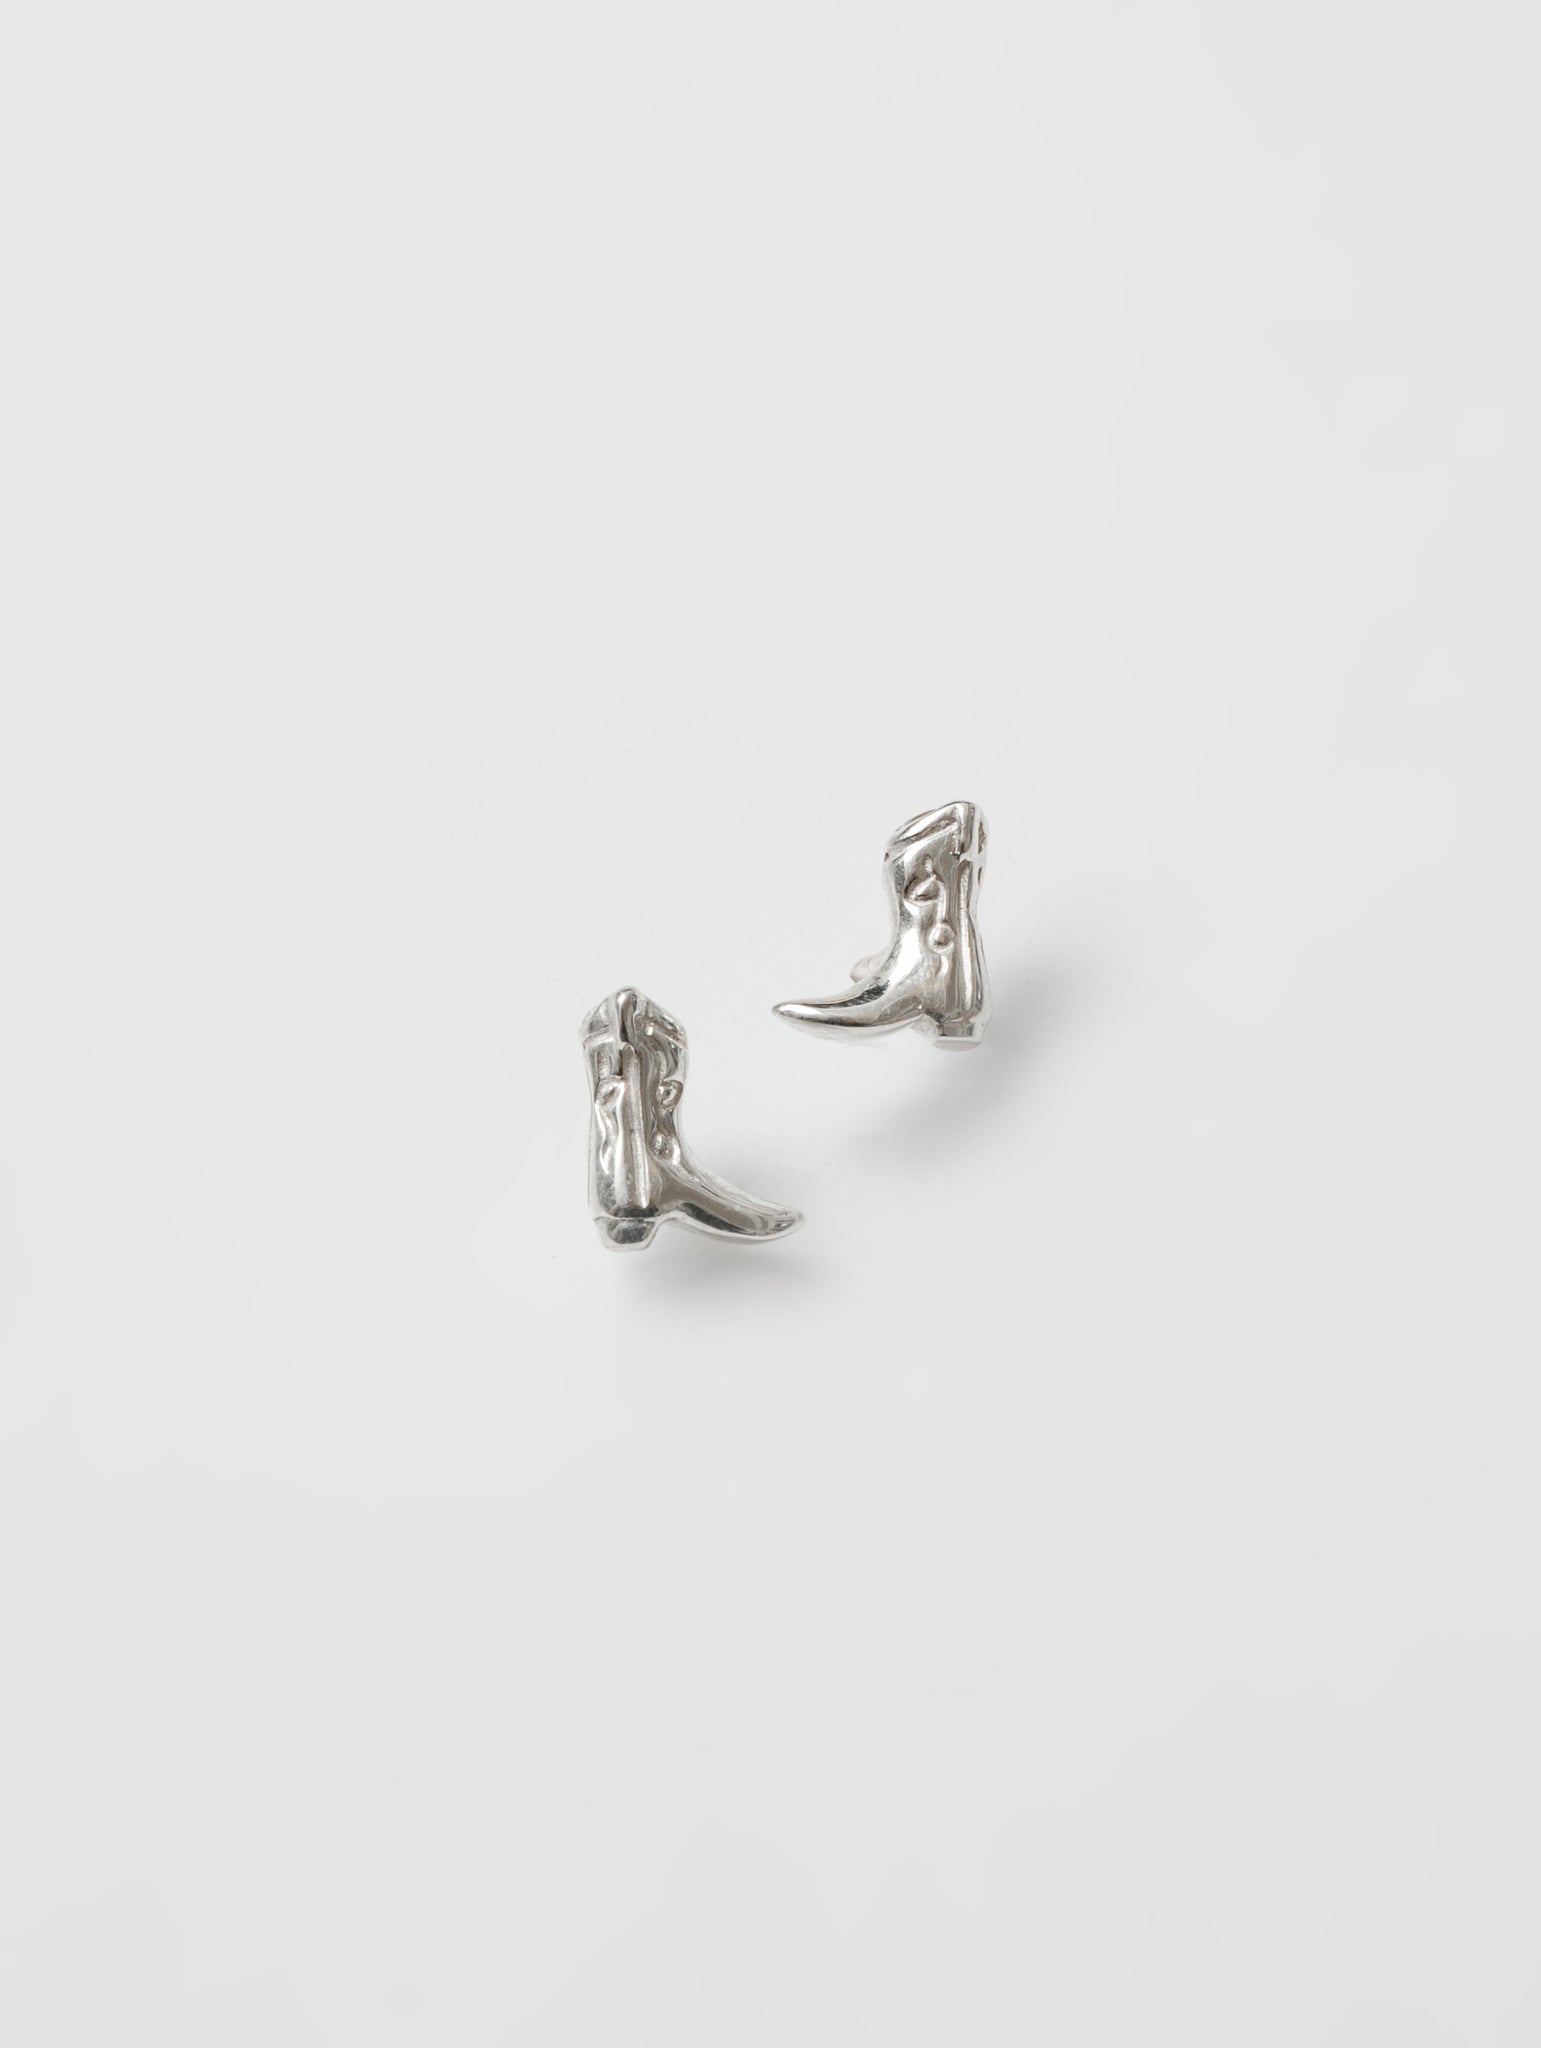 Wolf Circus Cowboy Boot Charm Stud Earrings Western in Sterling Silver-Earrings-wolfcircus.com